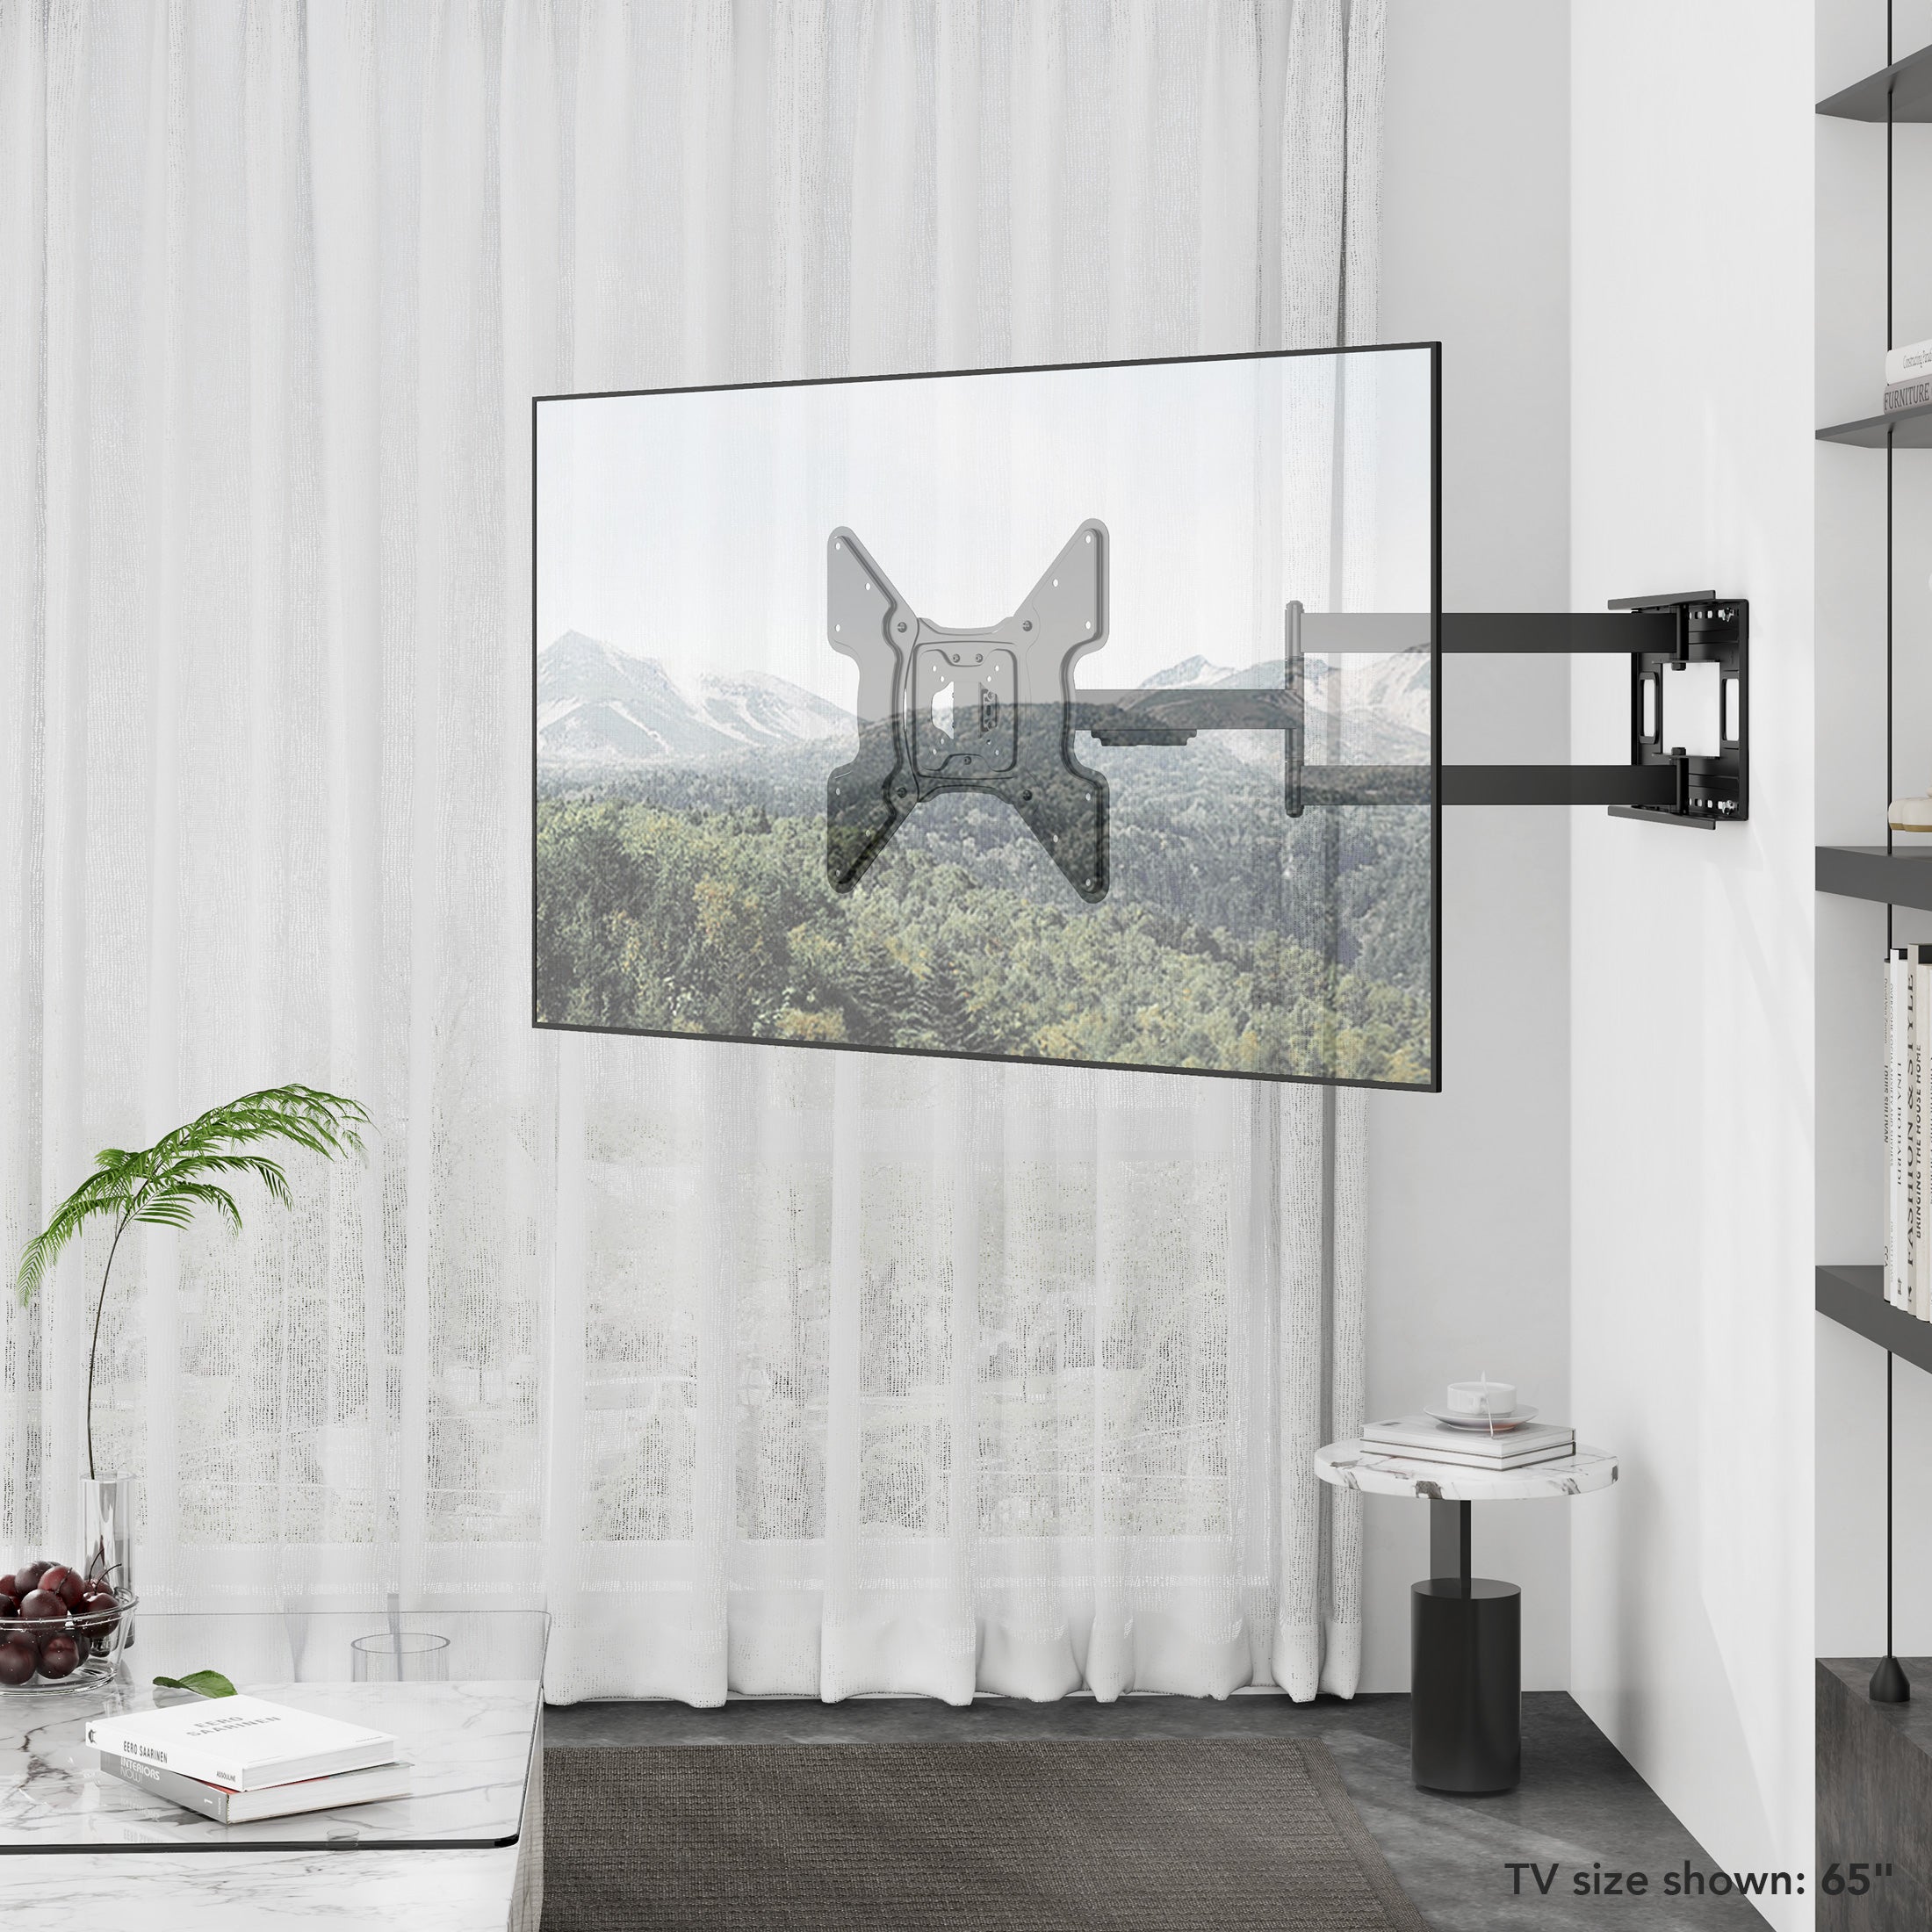 Full Motion TV Wall Mount with Extra Long Extension